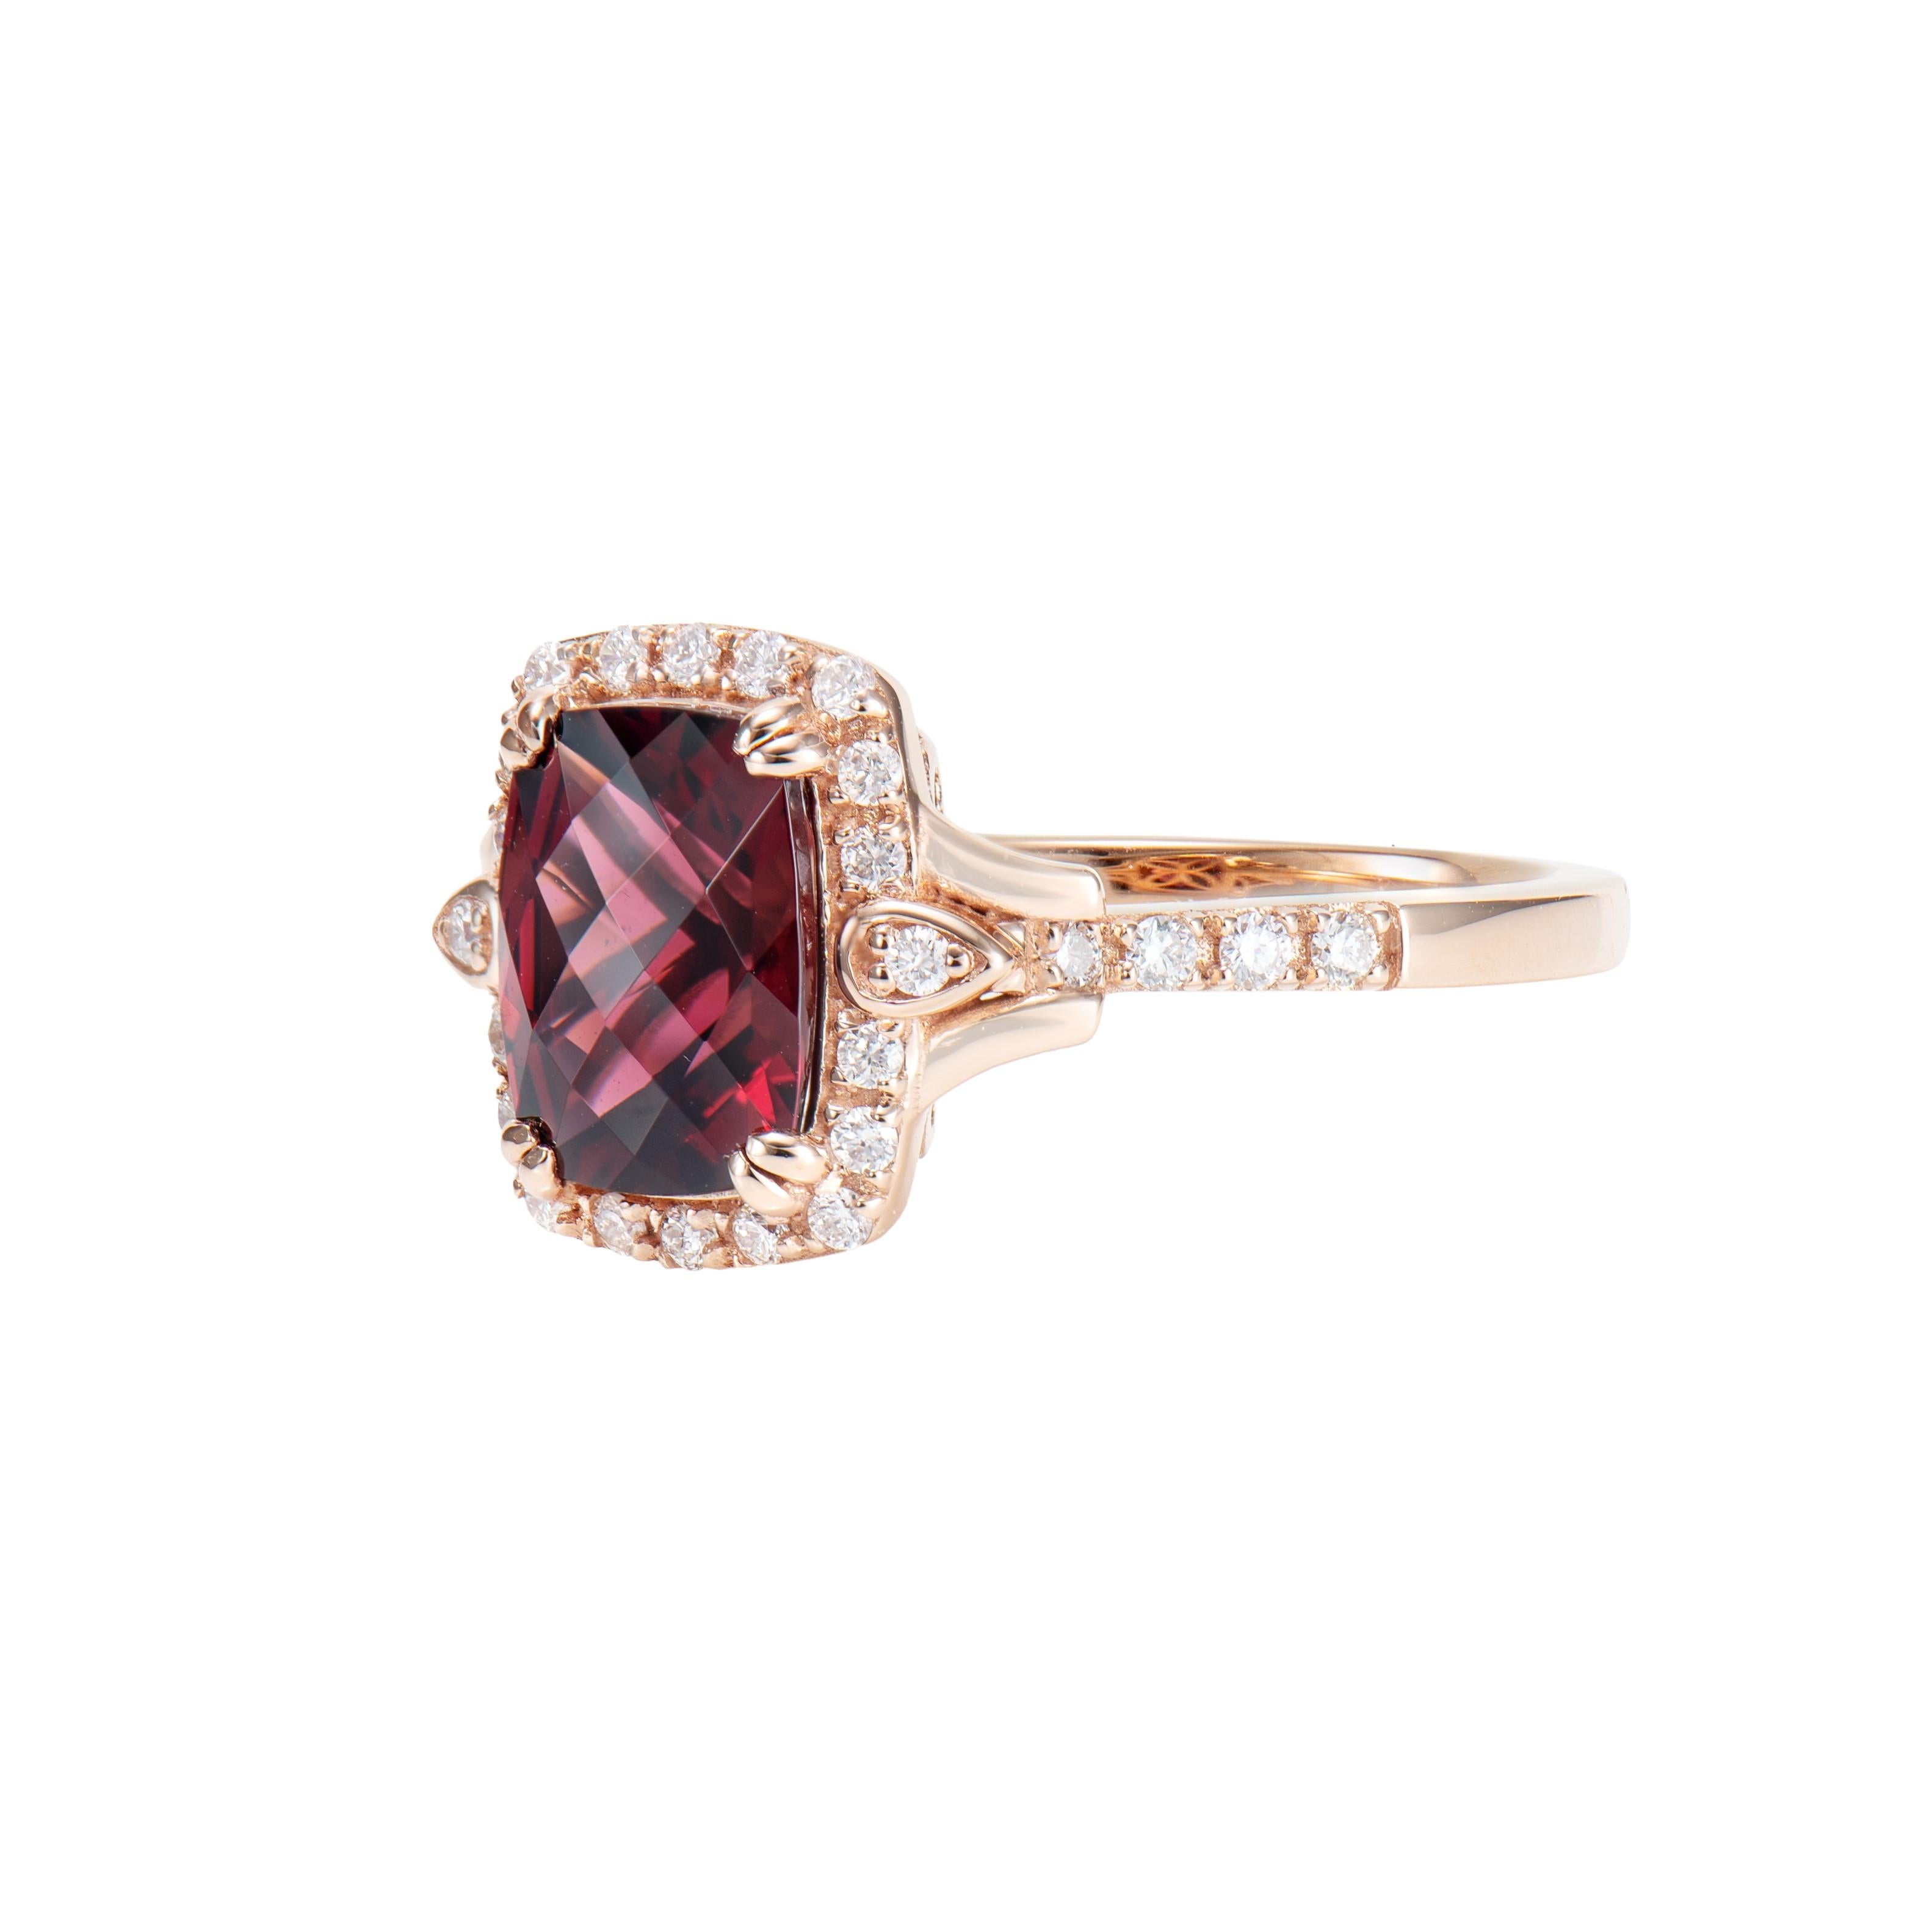 Cushion Cut 2.54 Carat Rhodolite Cocktail Ring in 18 Karat Rose Gold with Diamond. For Sale